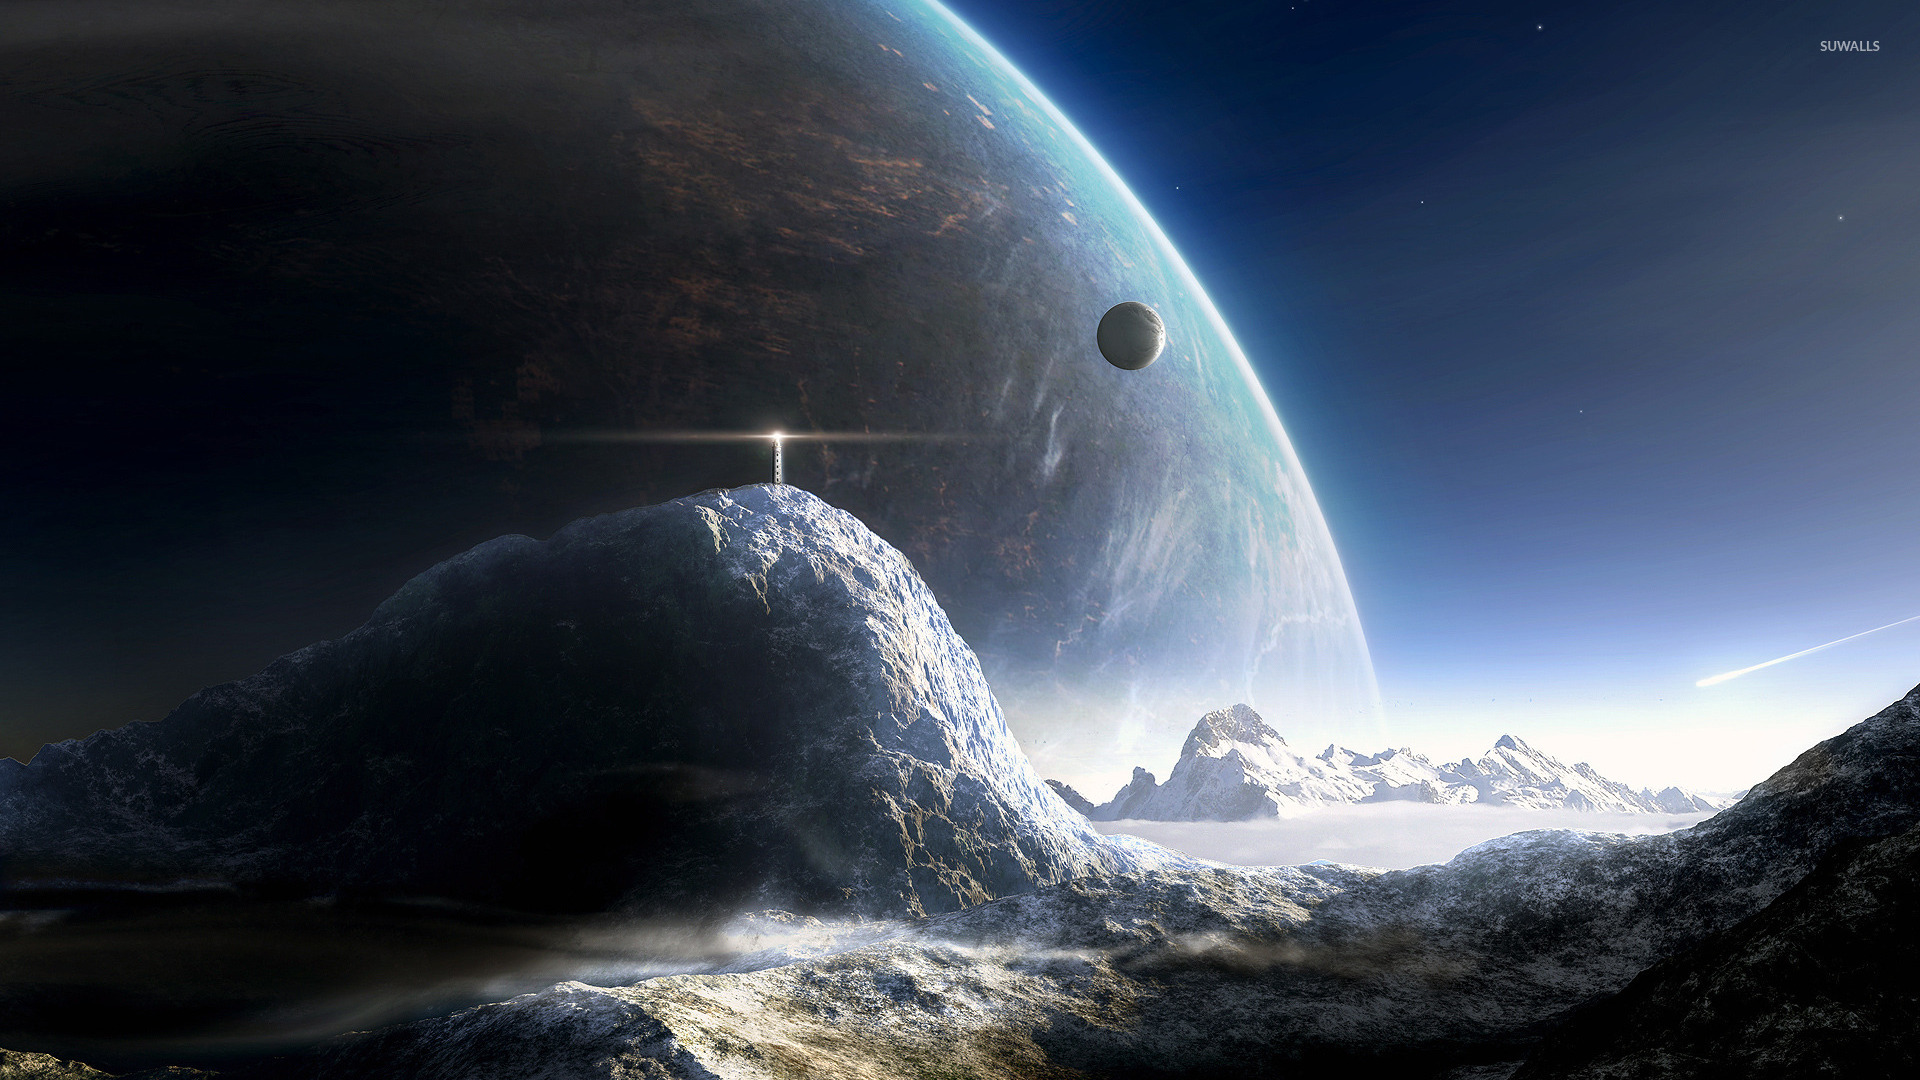 Lifgthouse on a distant planet wallpaper - Fantasy wallpapers - #13125